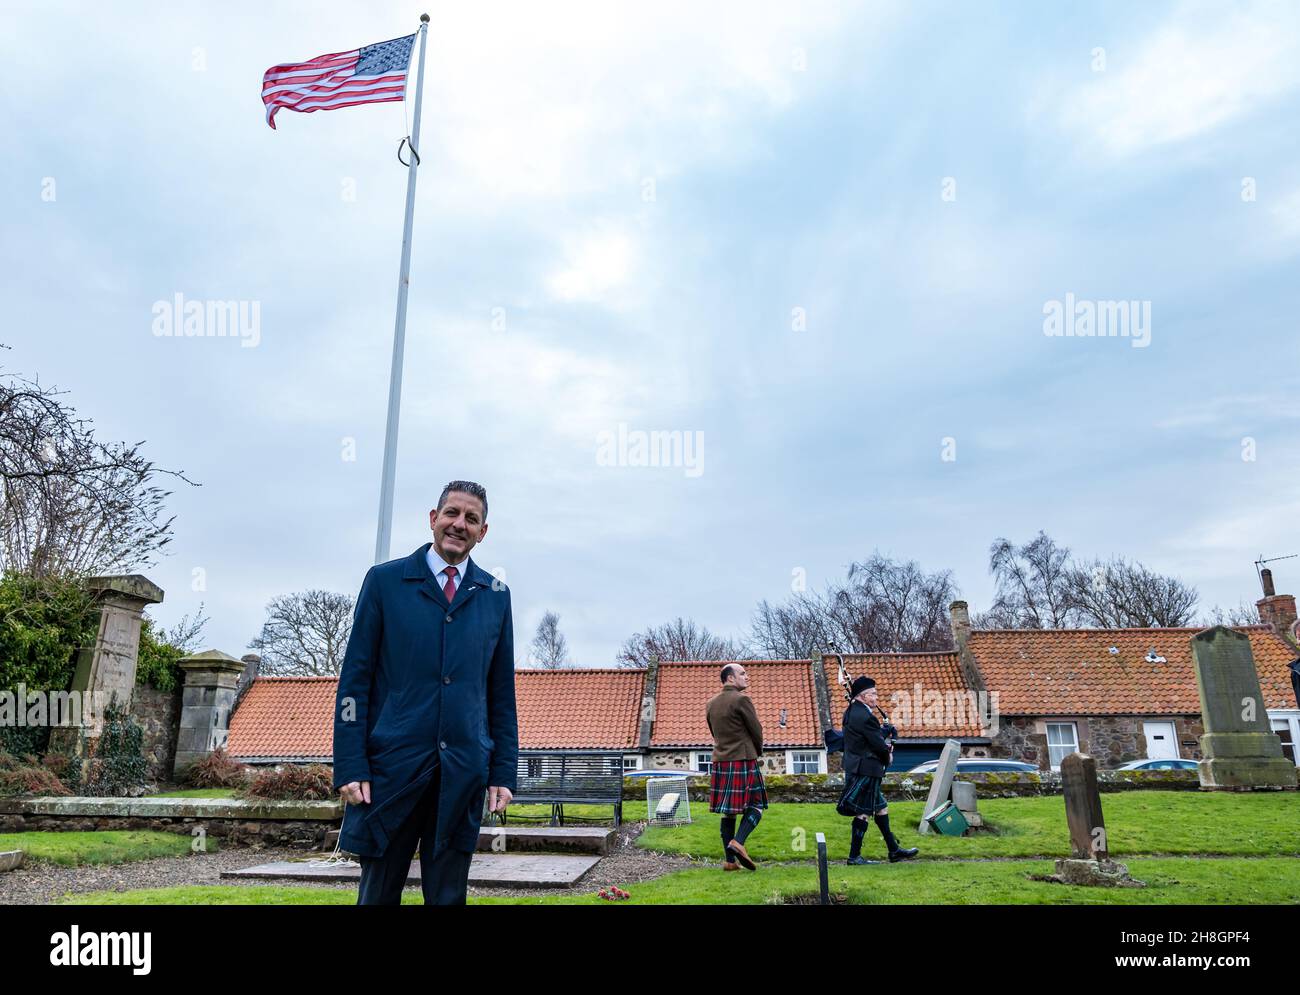 Us Consul General High Resolution Stock Photography and - Alamy